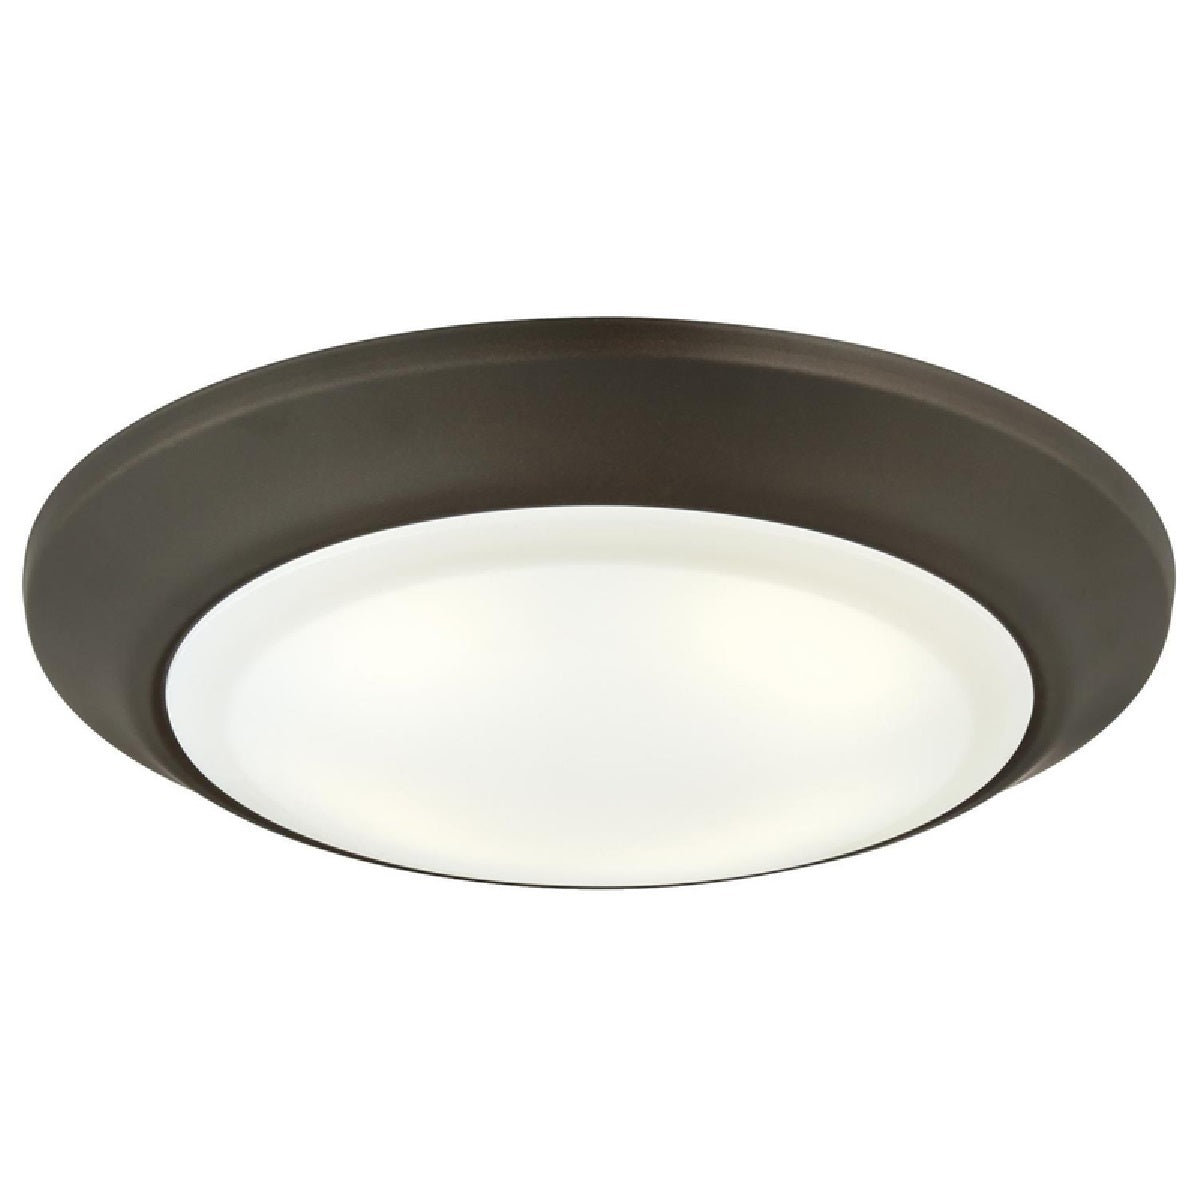 Westinghouse 63228 Dimmable Surface Mount Wet Location, Oil Rubbed Bronze Finish with Frosted Lens